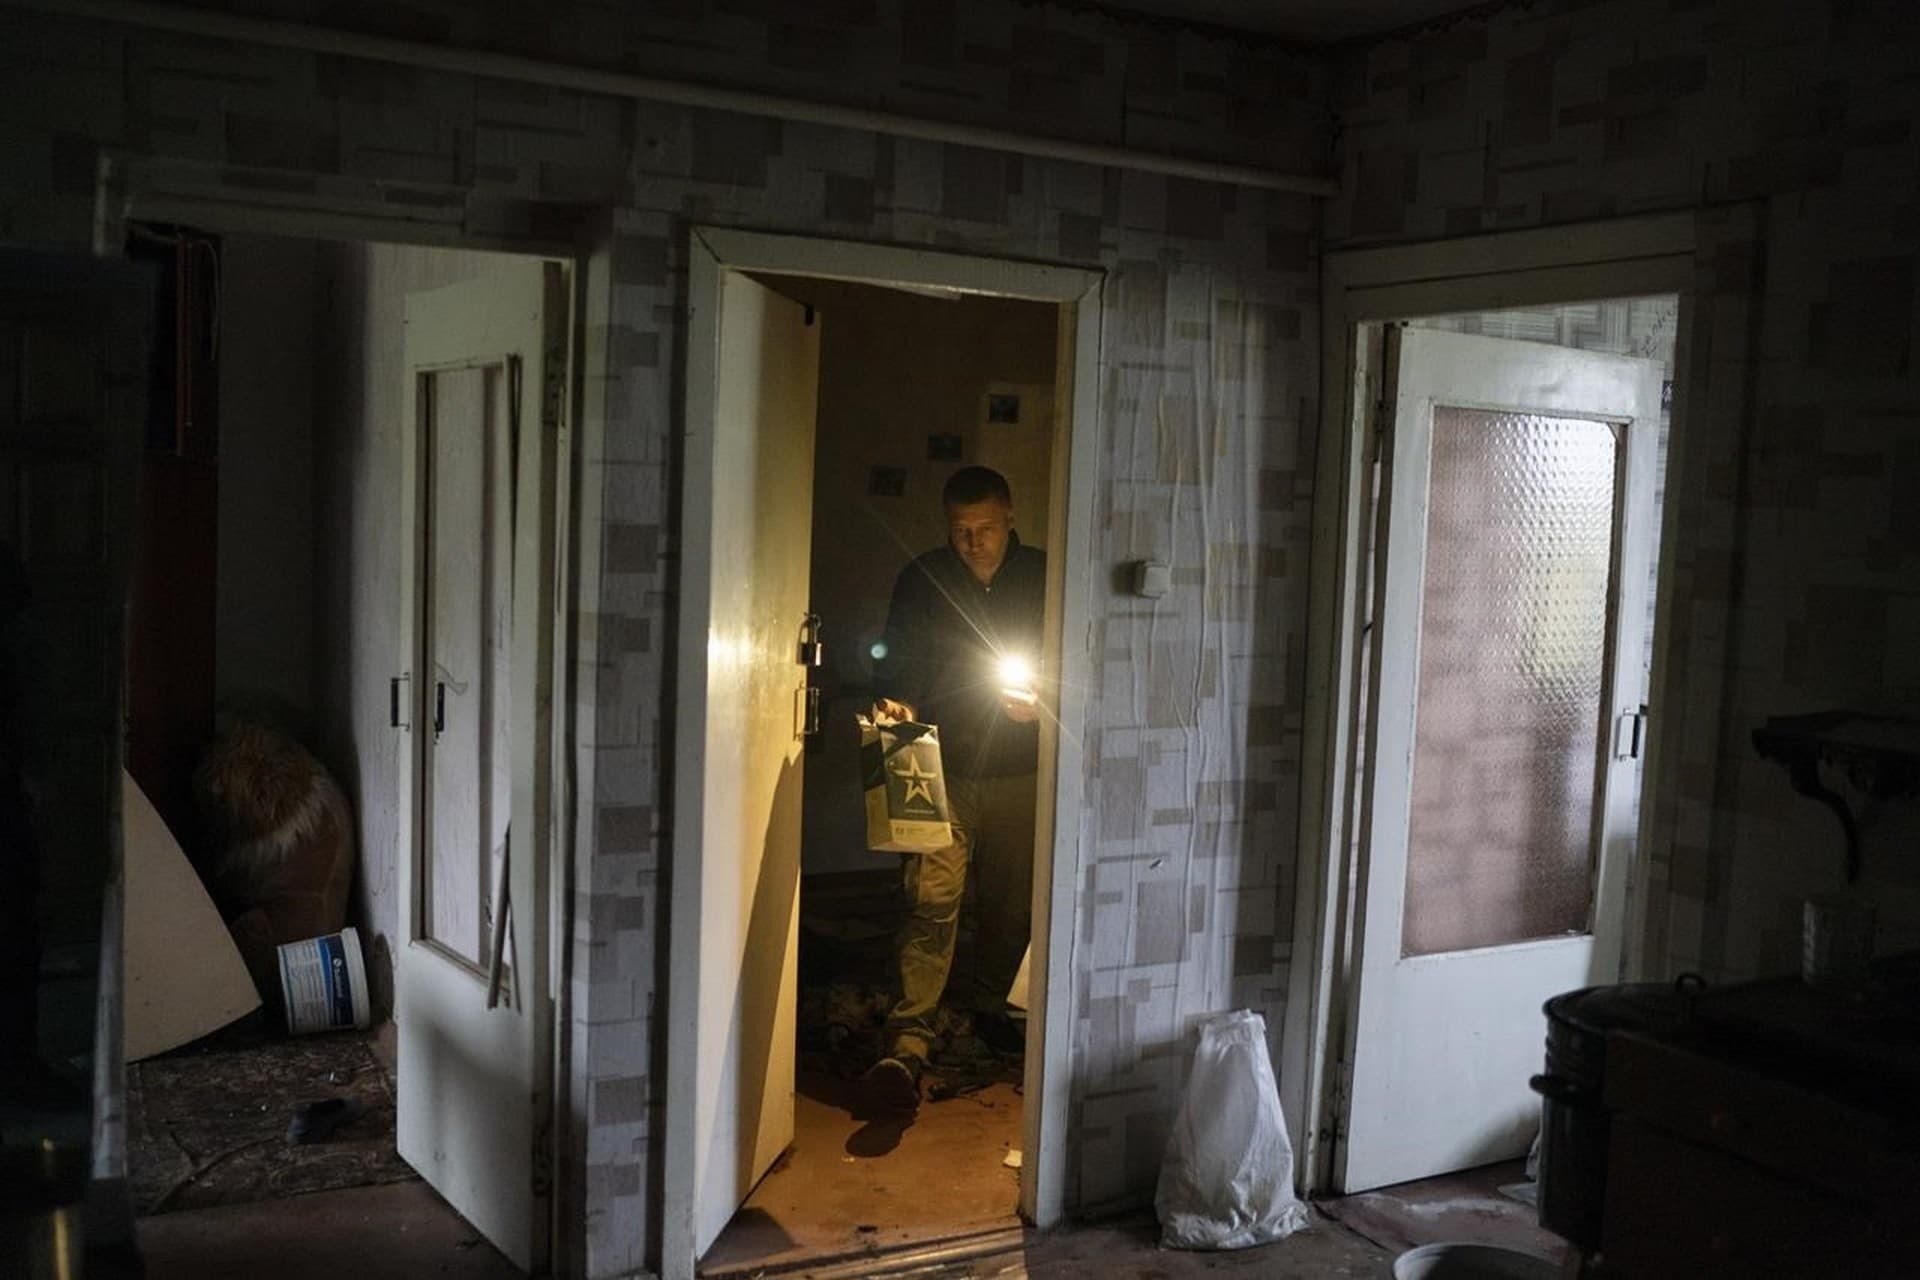 Anatolii Klyzhen carries an empty Russian army food ration packet that was left in his apartment while occupied by the Russian soldiers in the freed village of Hrakove